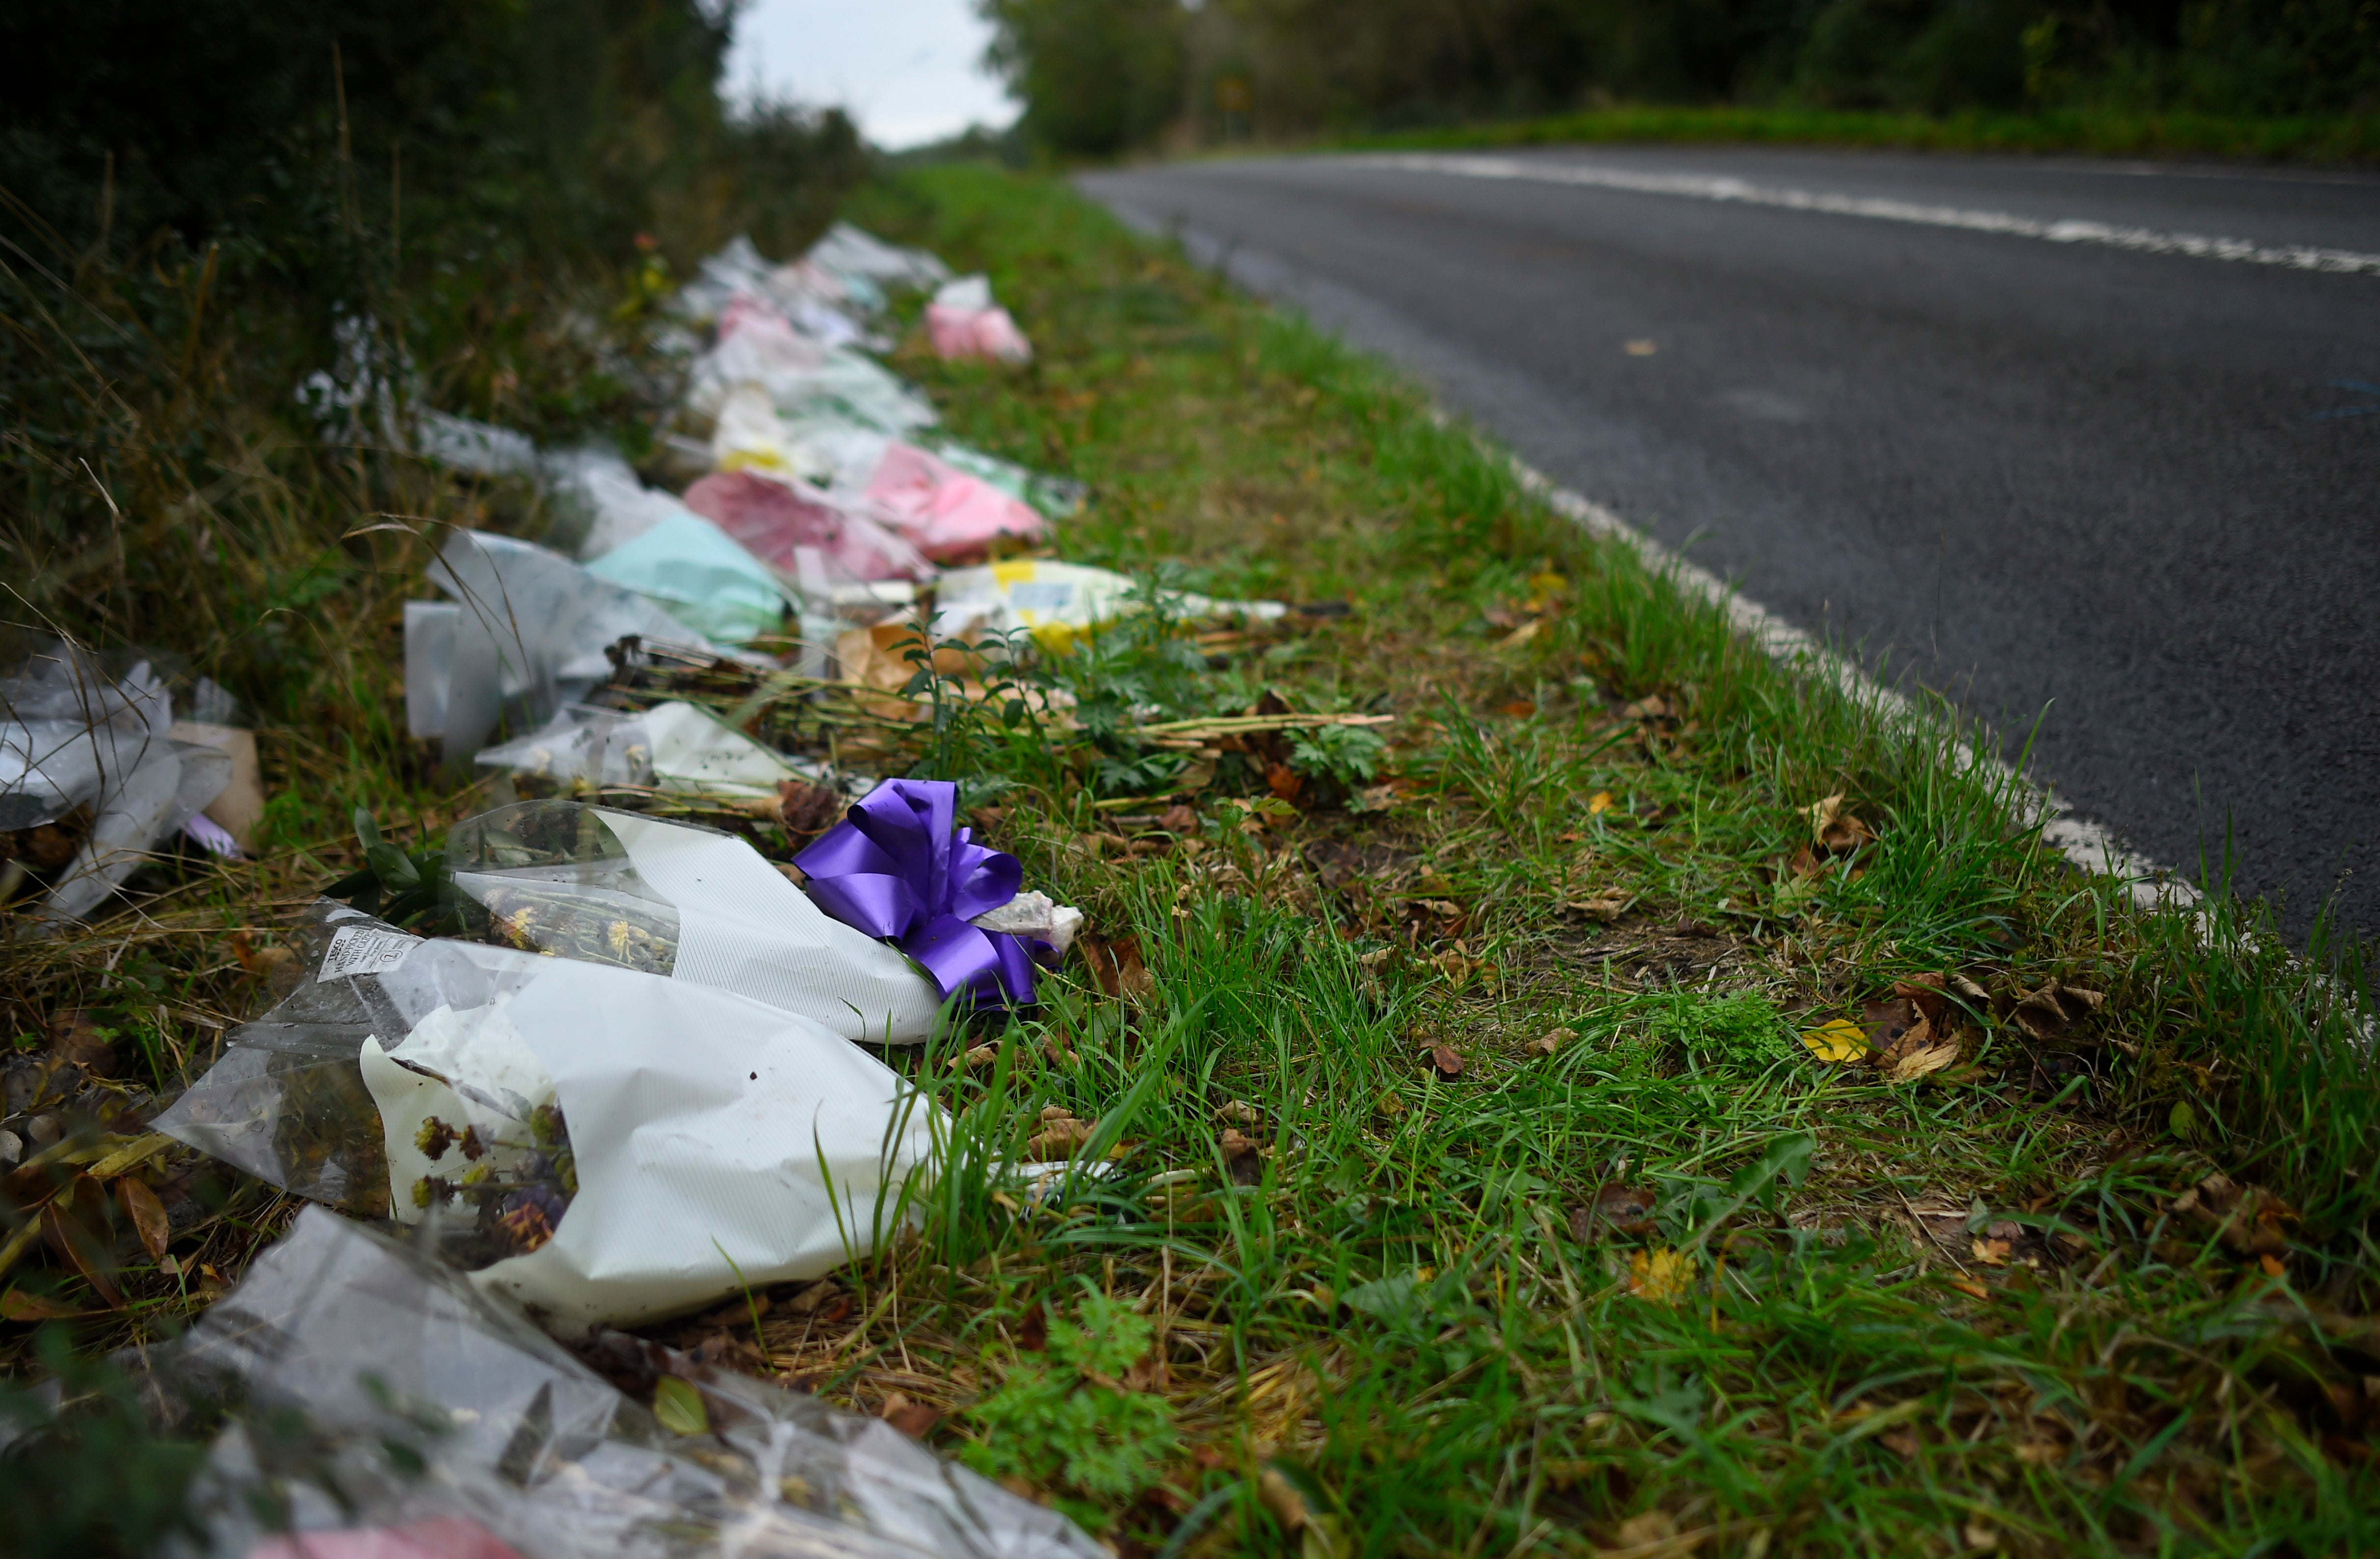 Tributes are left in memory of Harry Dunne near RAF Croughton on 7 October 2019